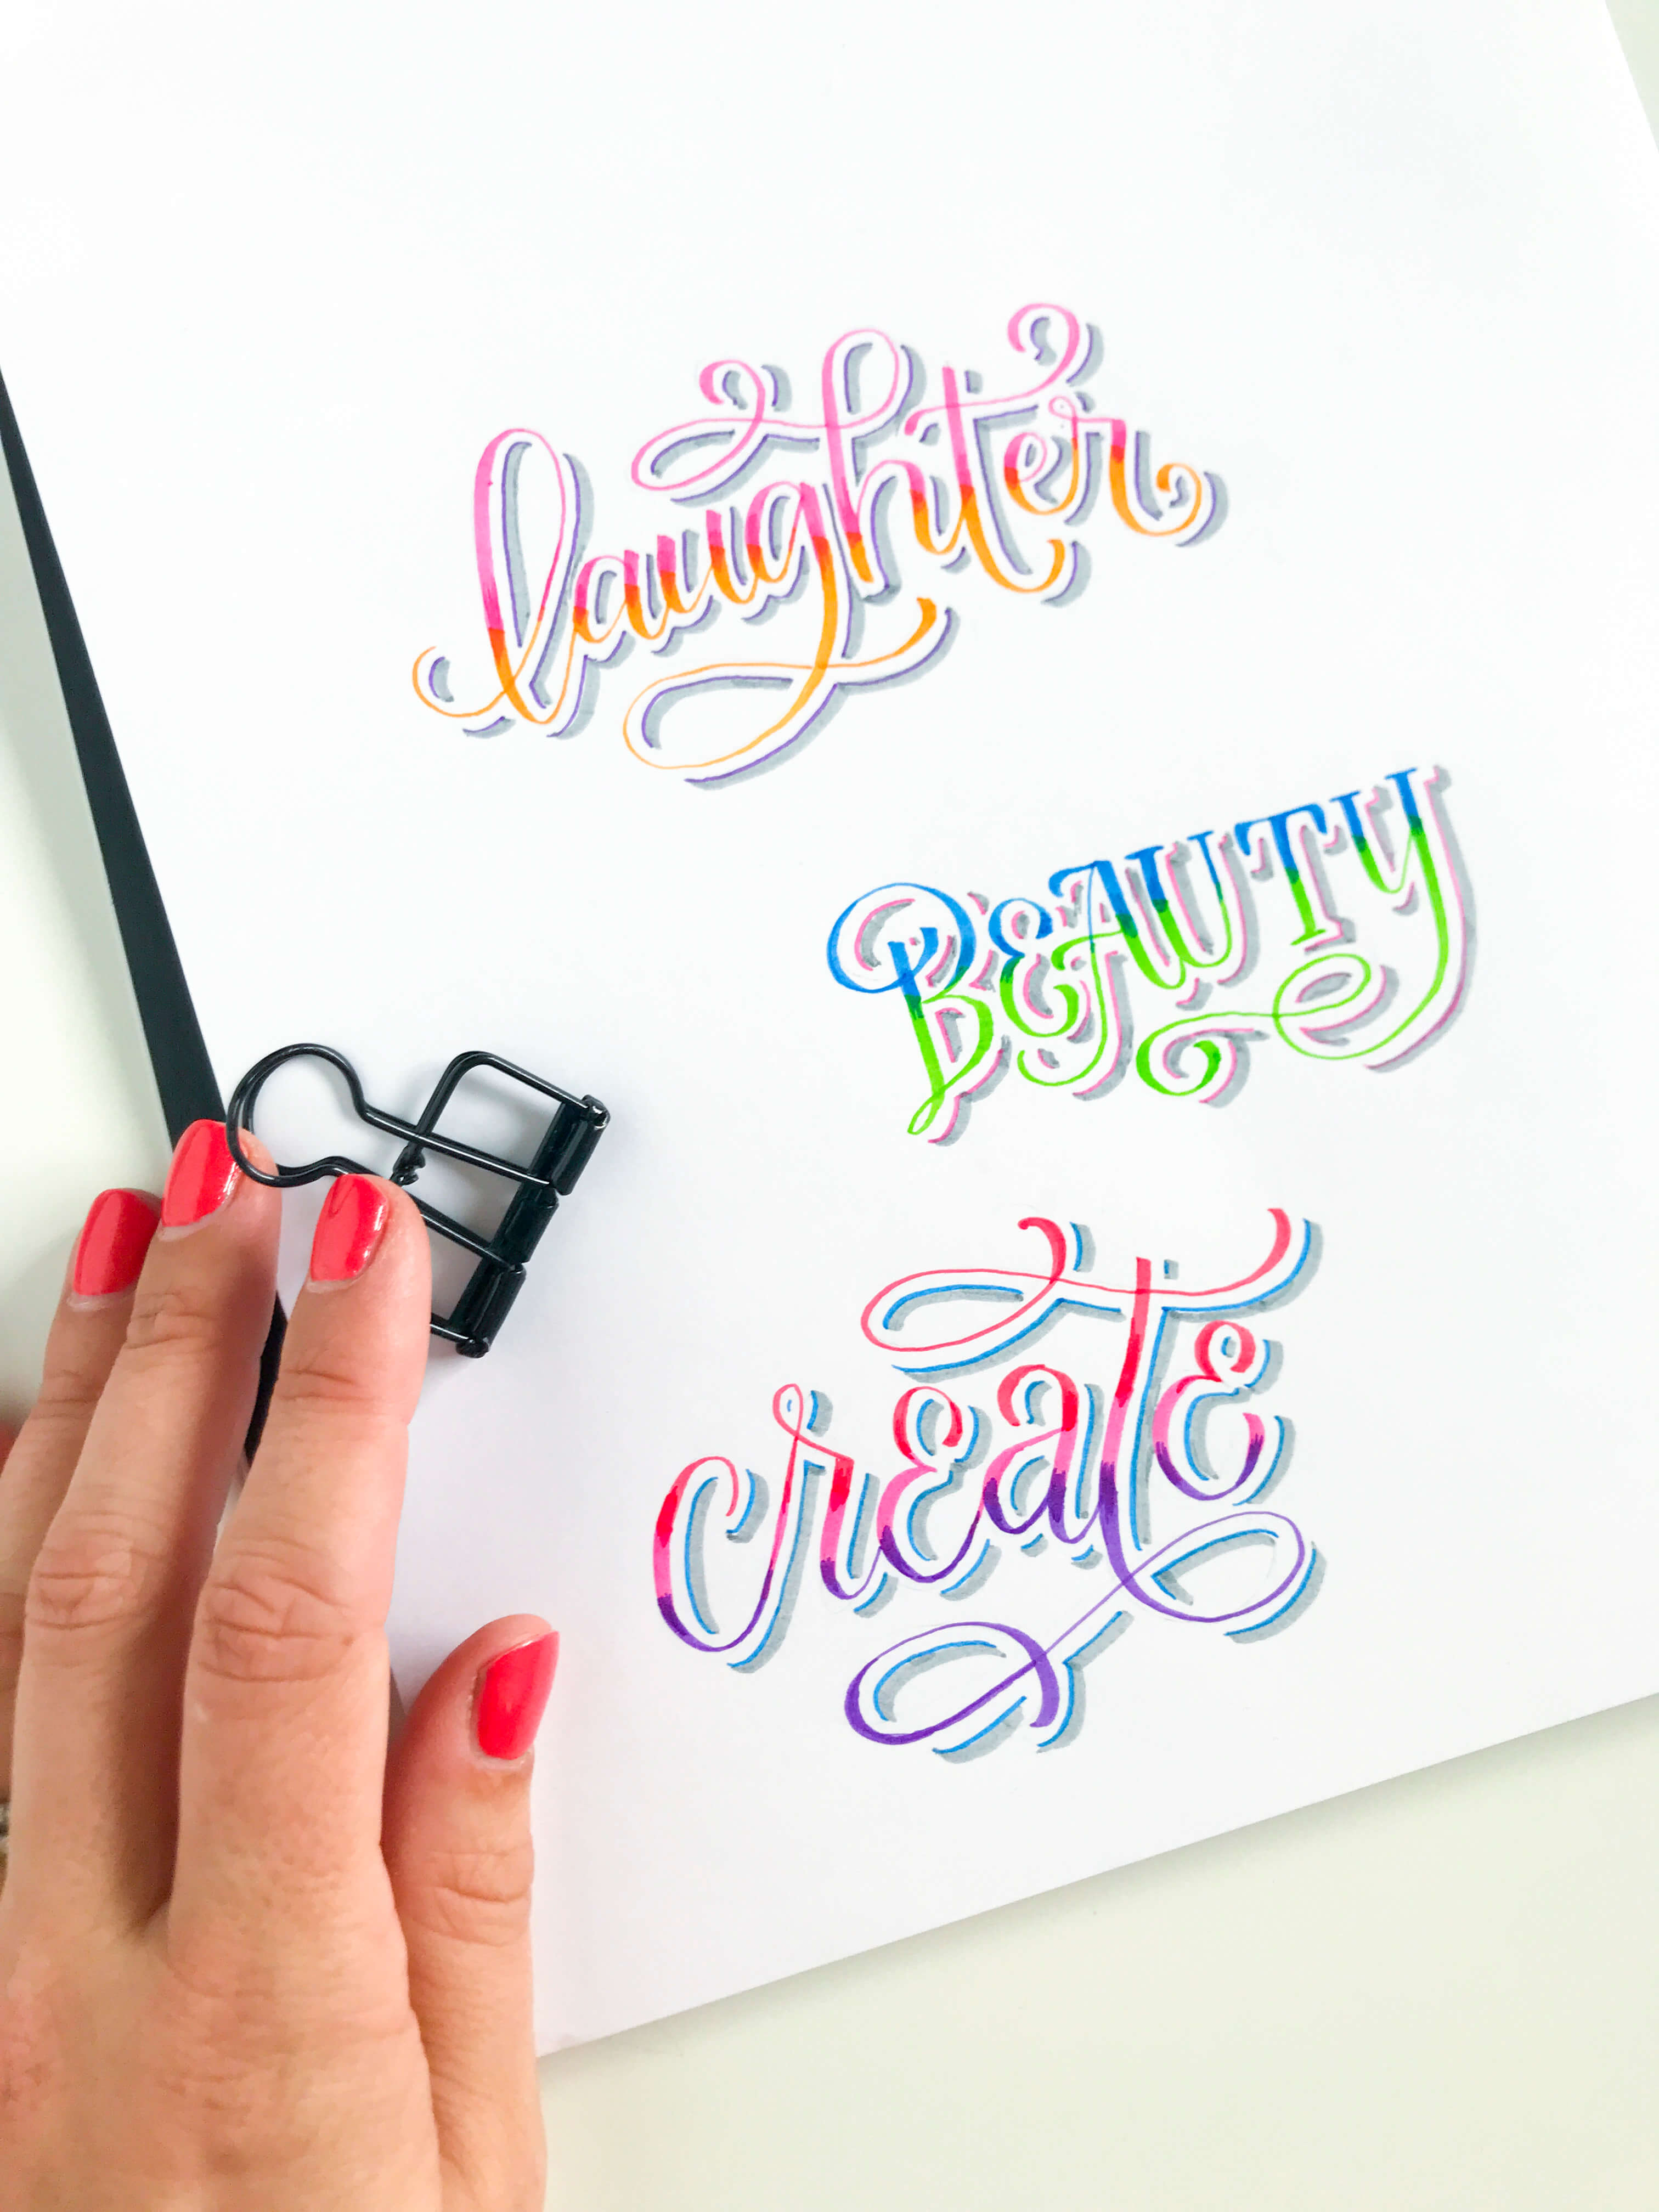 Learn how to create beautifully blended letters with the new colored Tombow Fudenosuke brush pens in this free tutorial from Amanda Arneill on amandaarneill.com